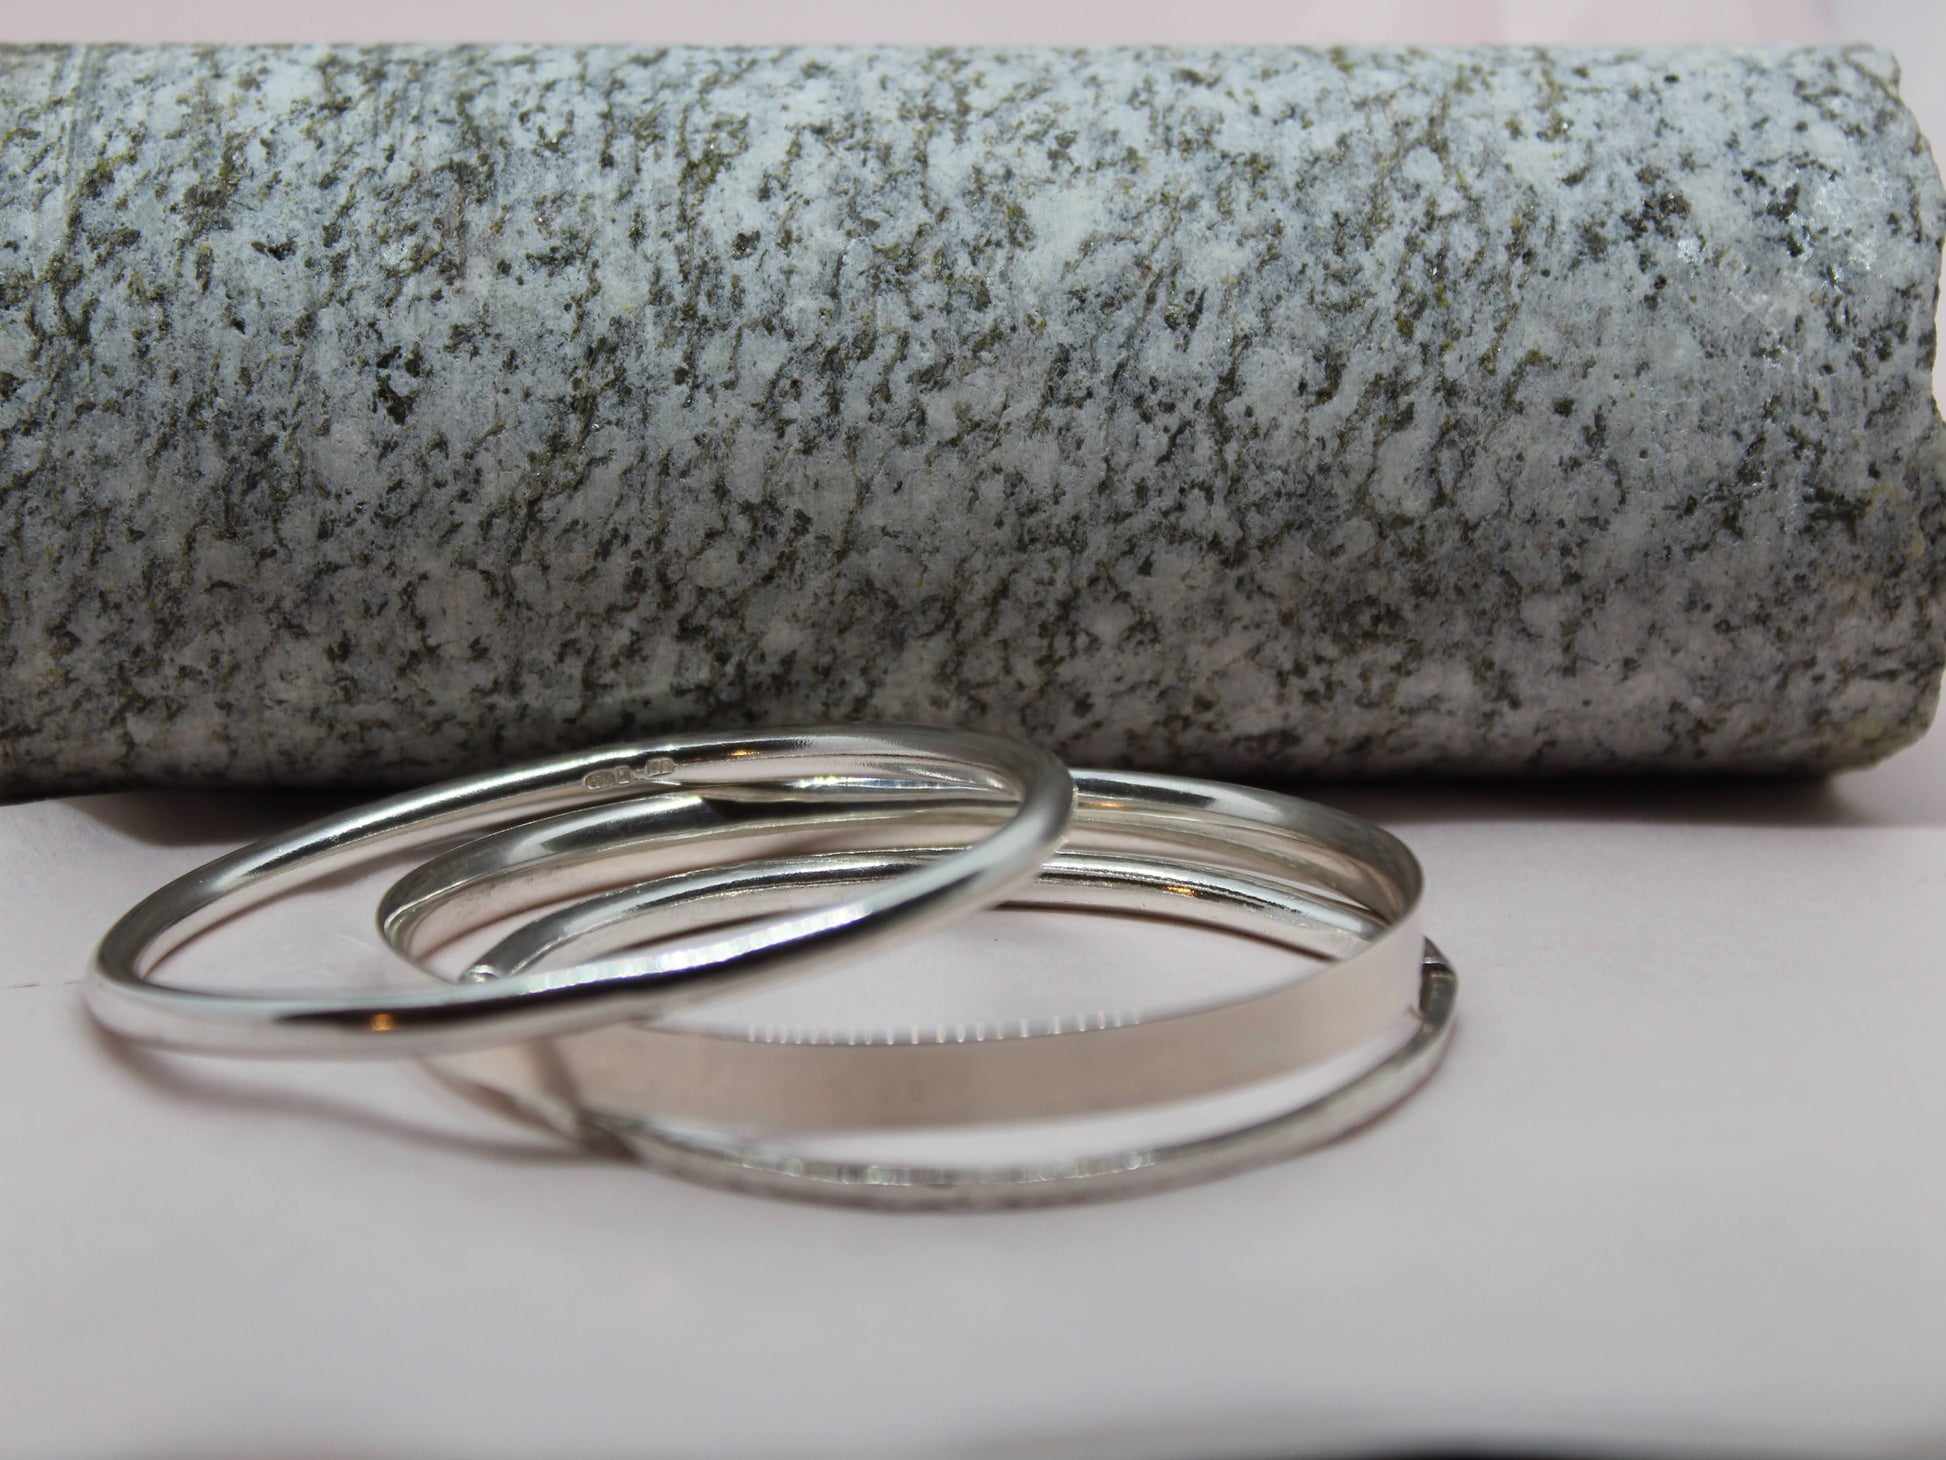 Handmade sterling silver 4mm D shaped silver wire. Elegant and classical solid bangle. Pictured here with other bangles